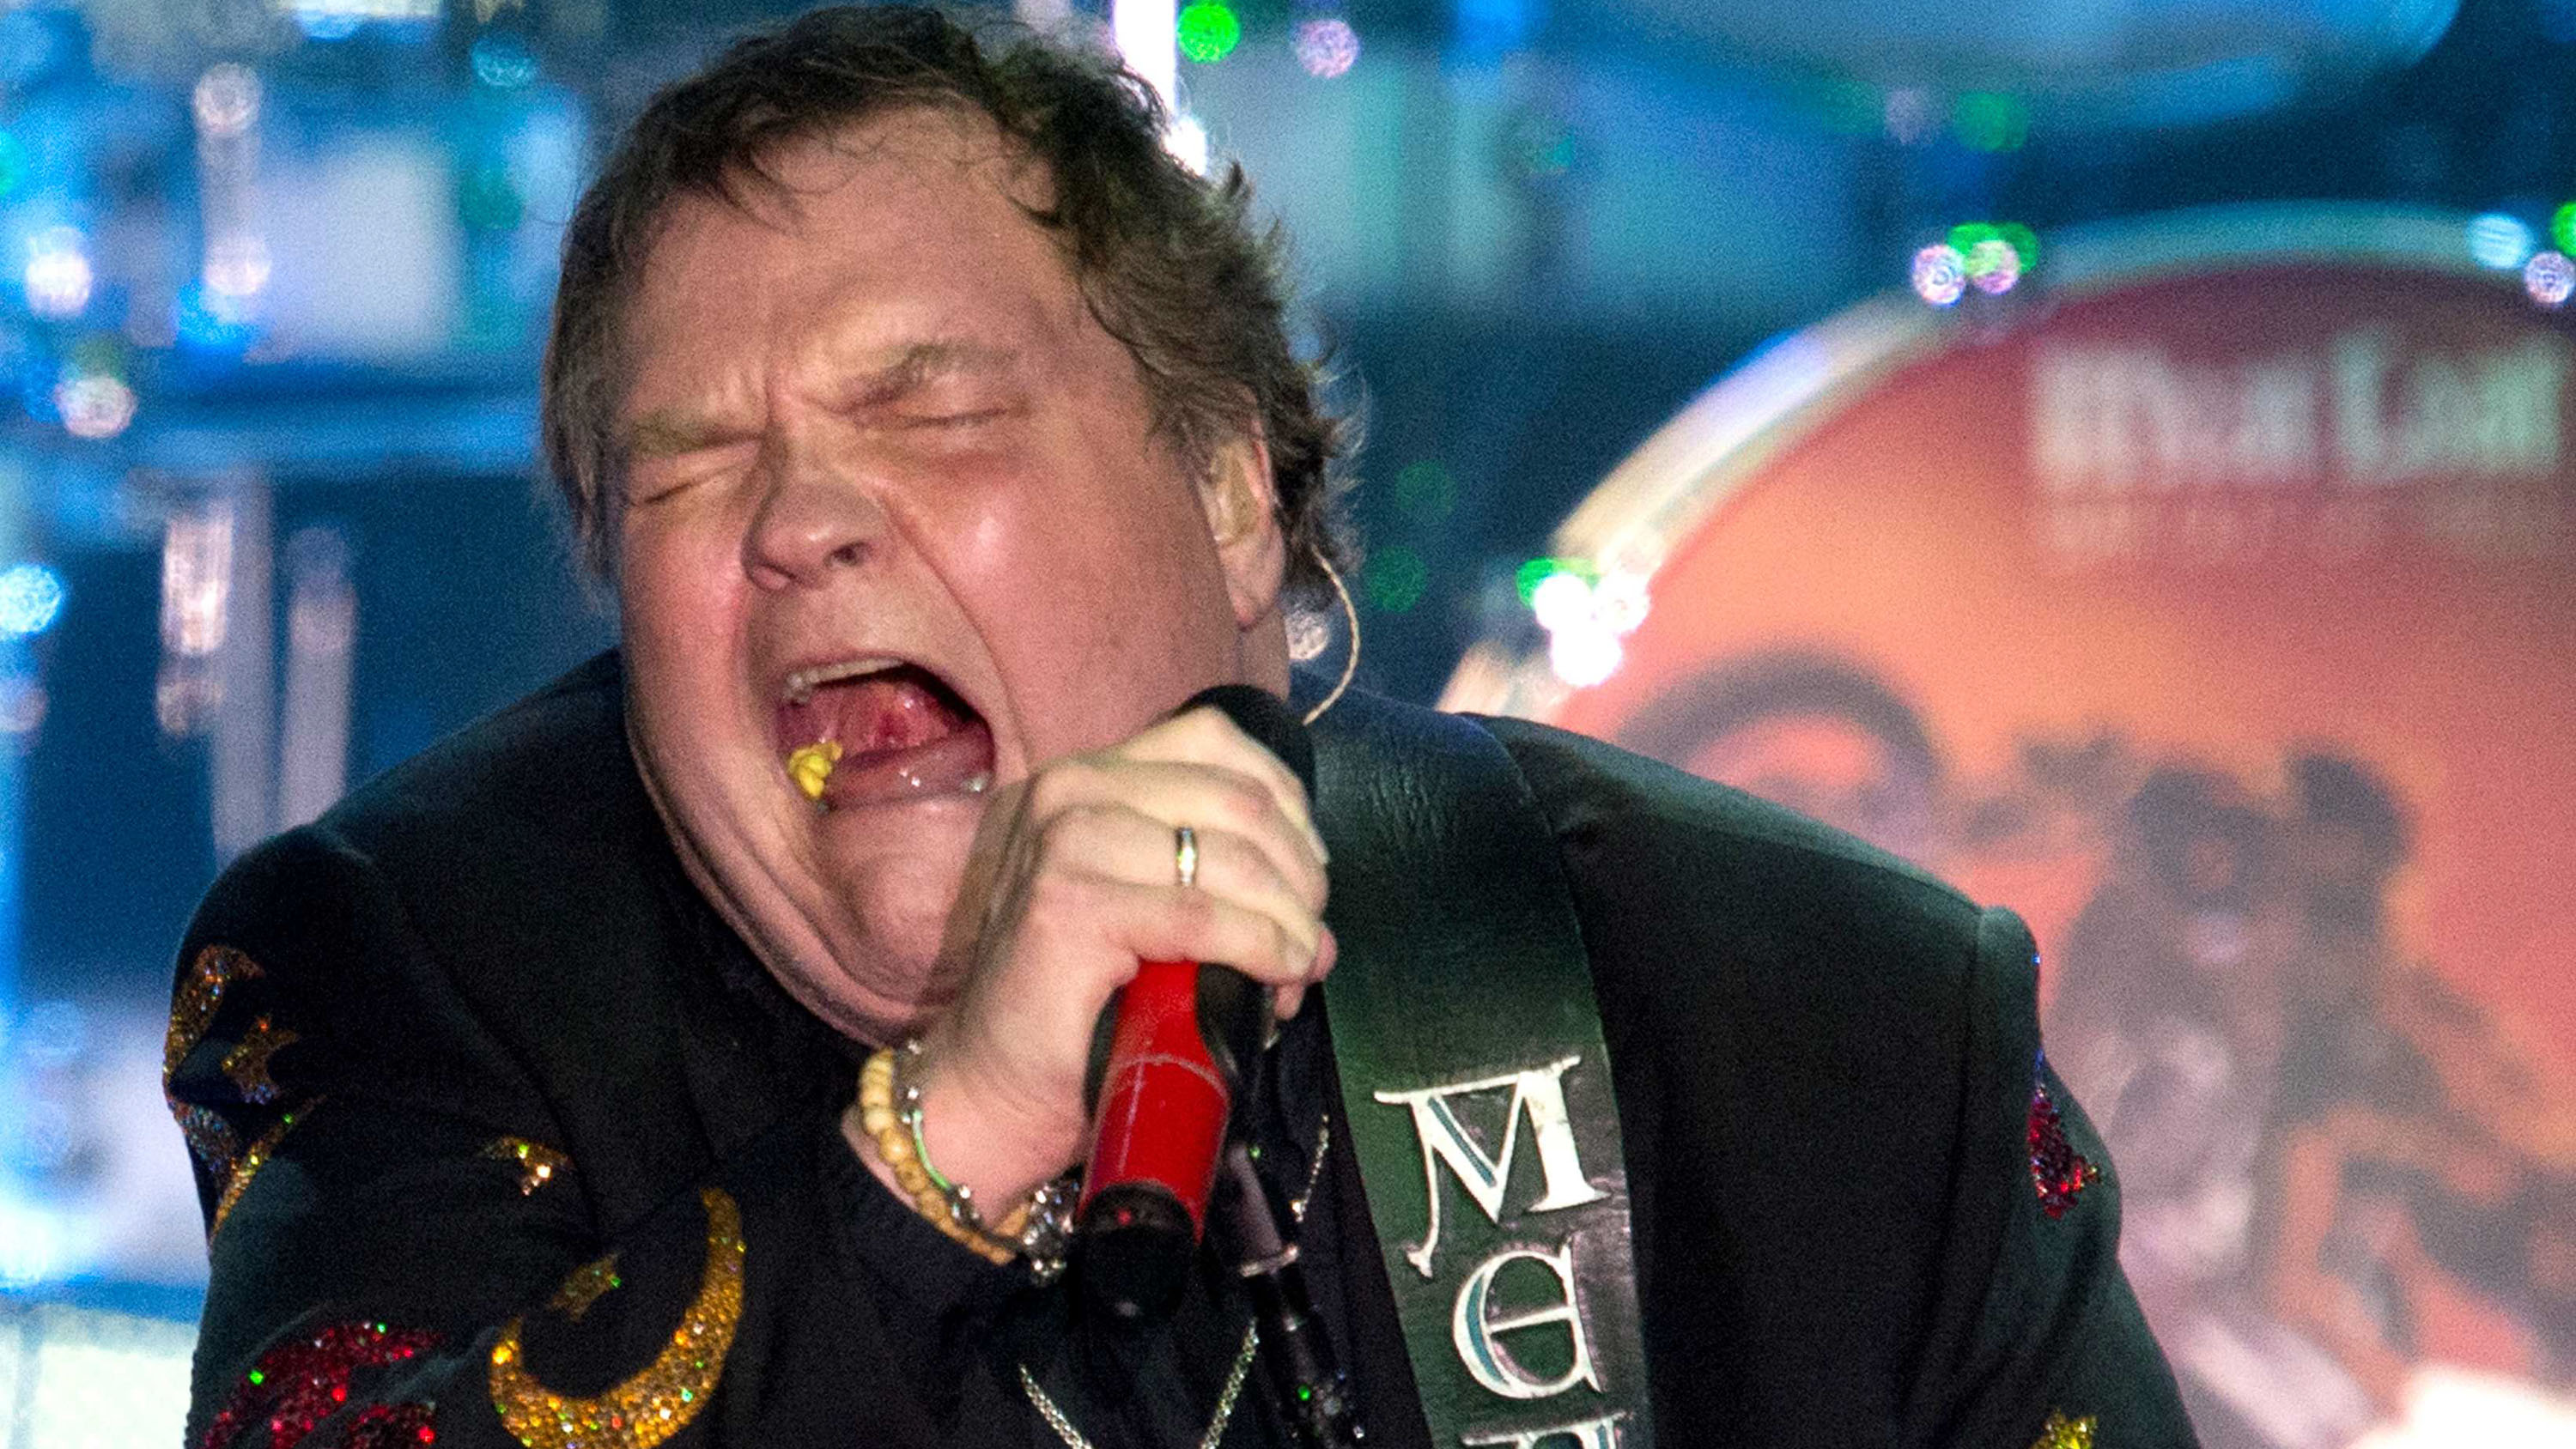 US rocker Meat Loaf &amp;#39;recovering well&amp;#39; after collapse on stage in Canada